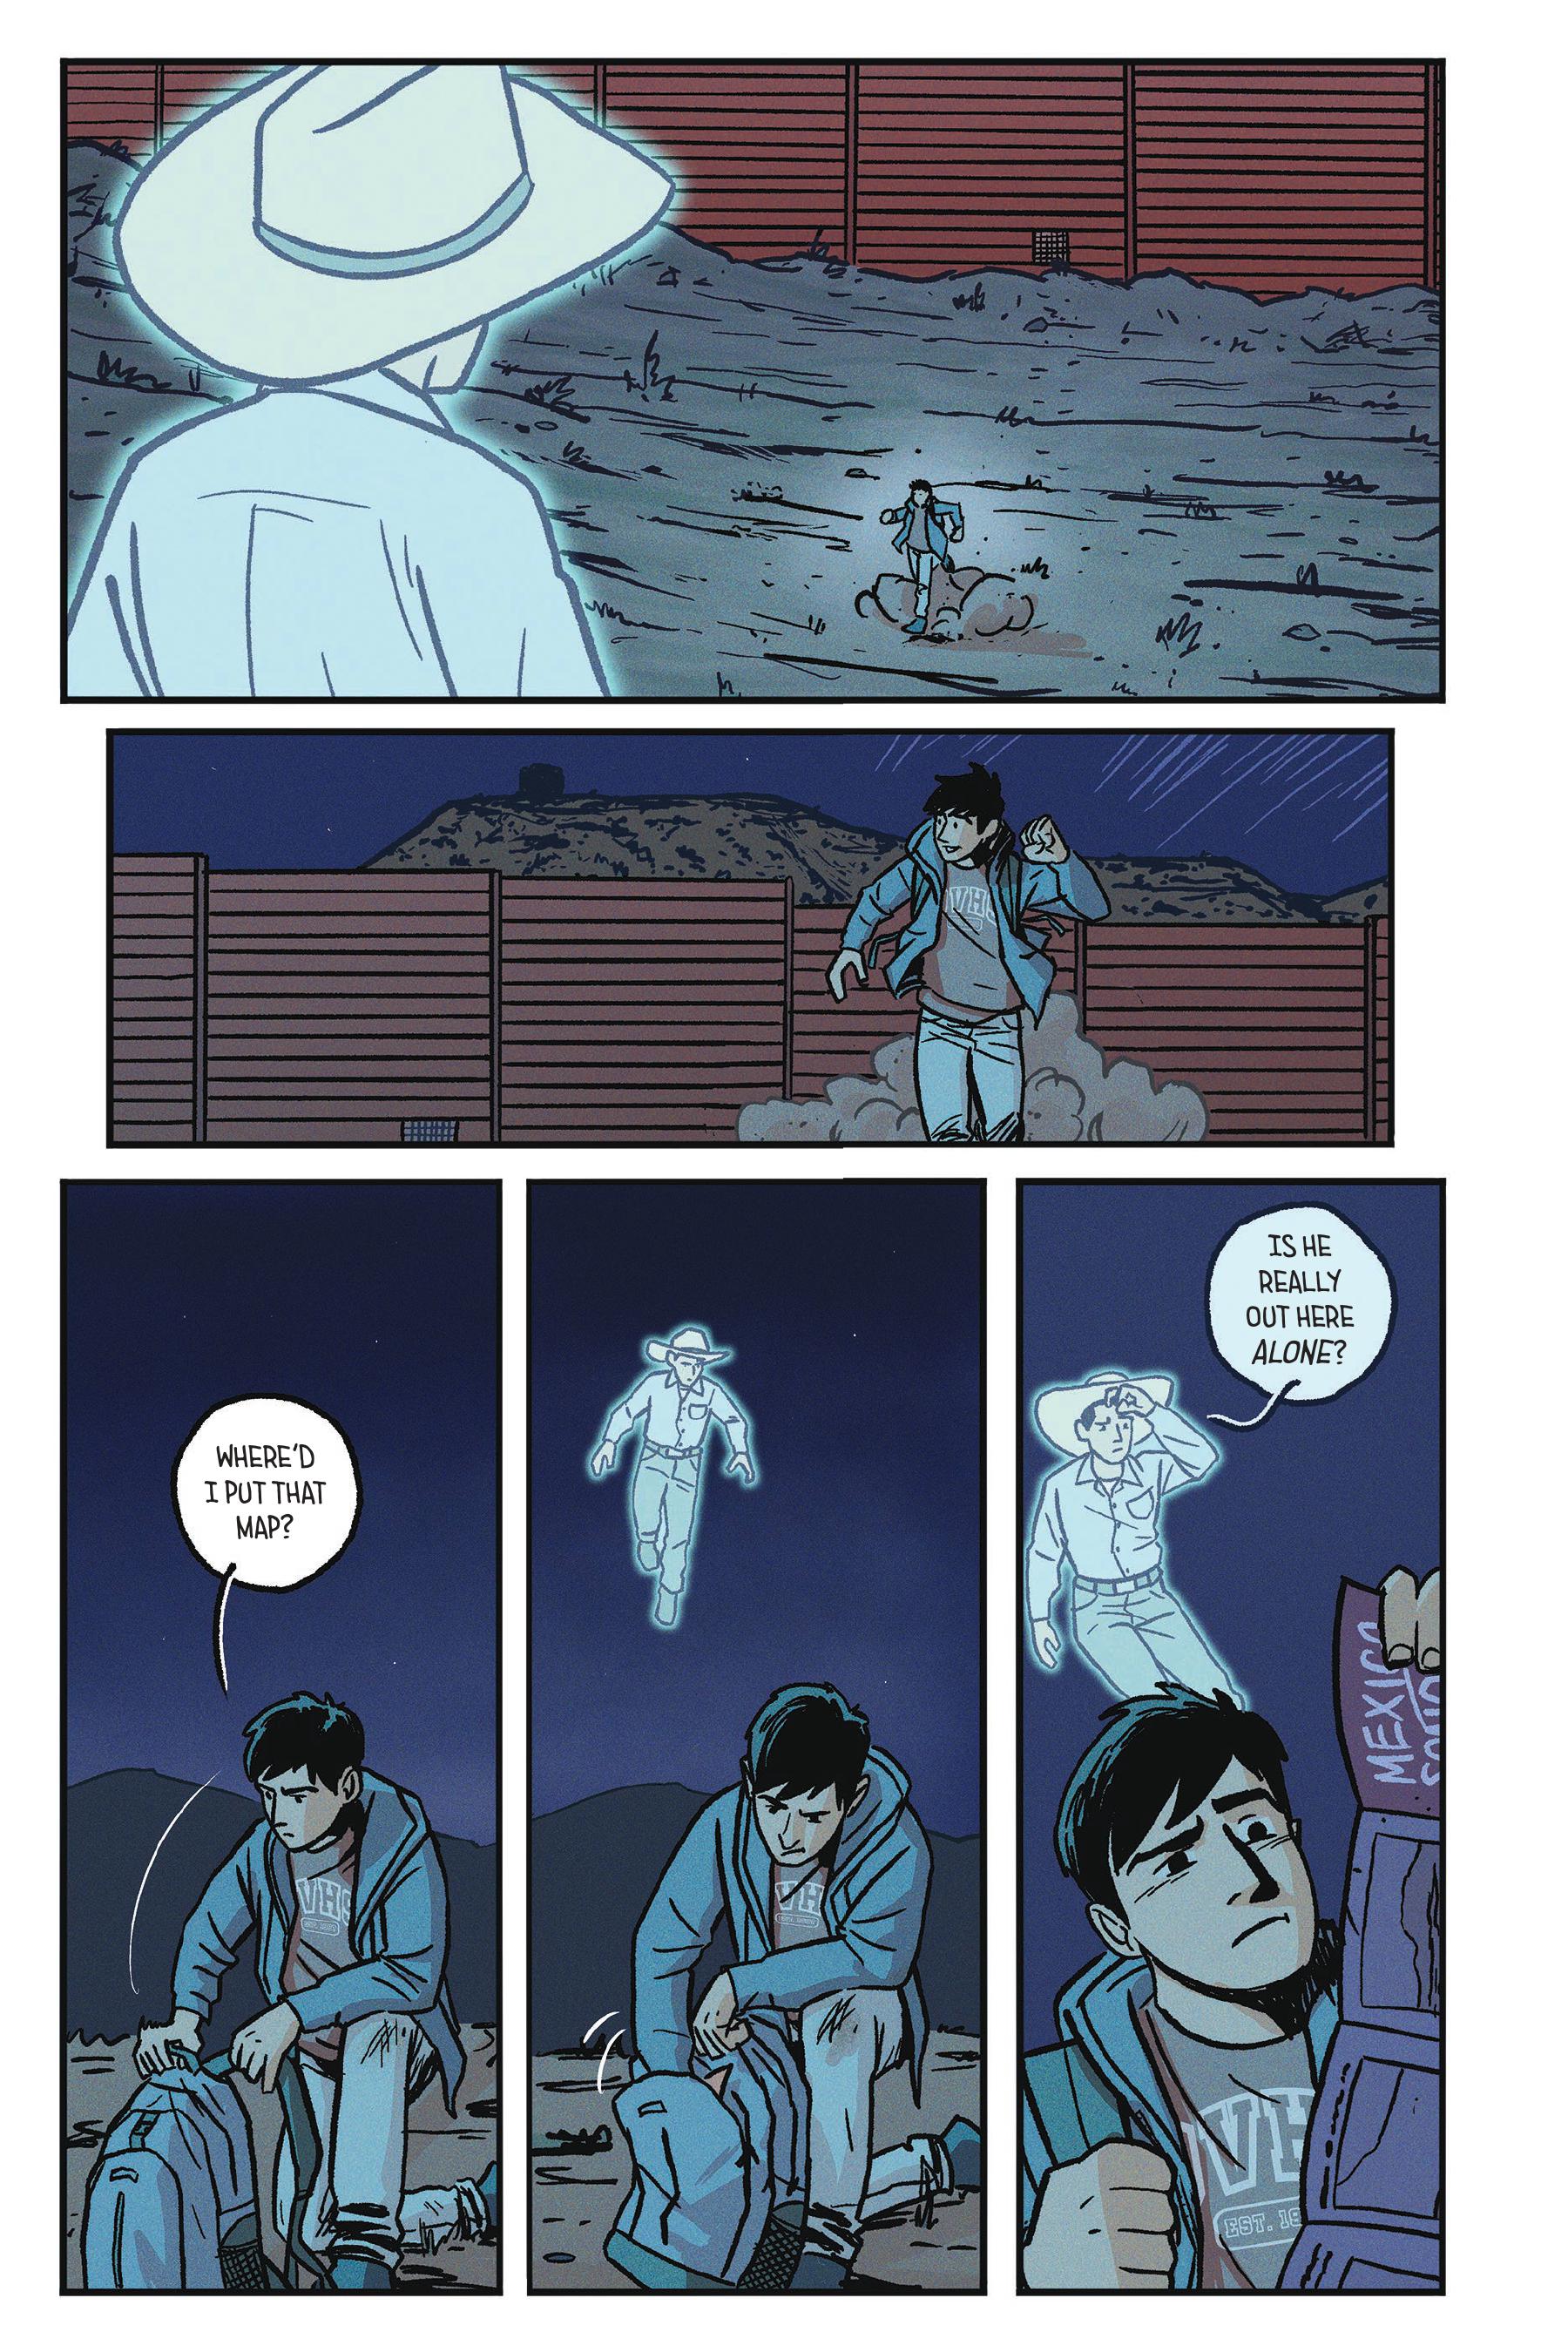 Interior colored comics pages from Frontera